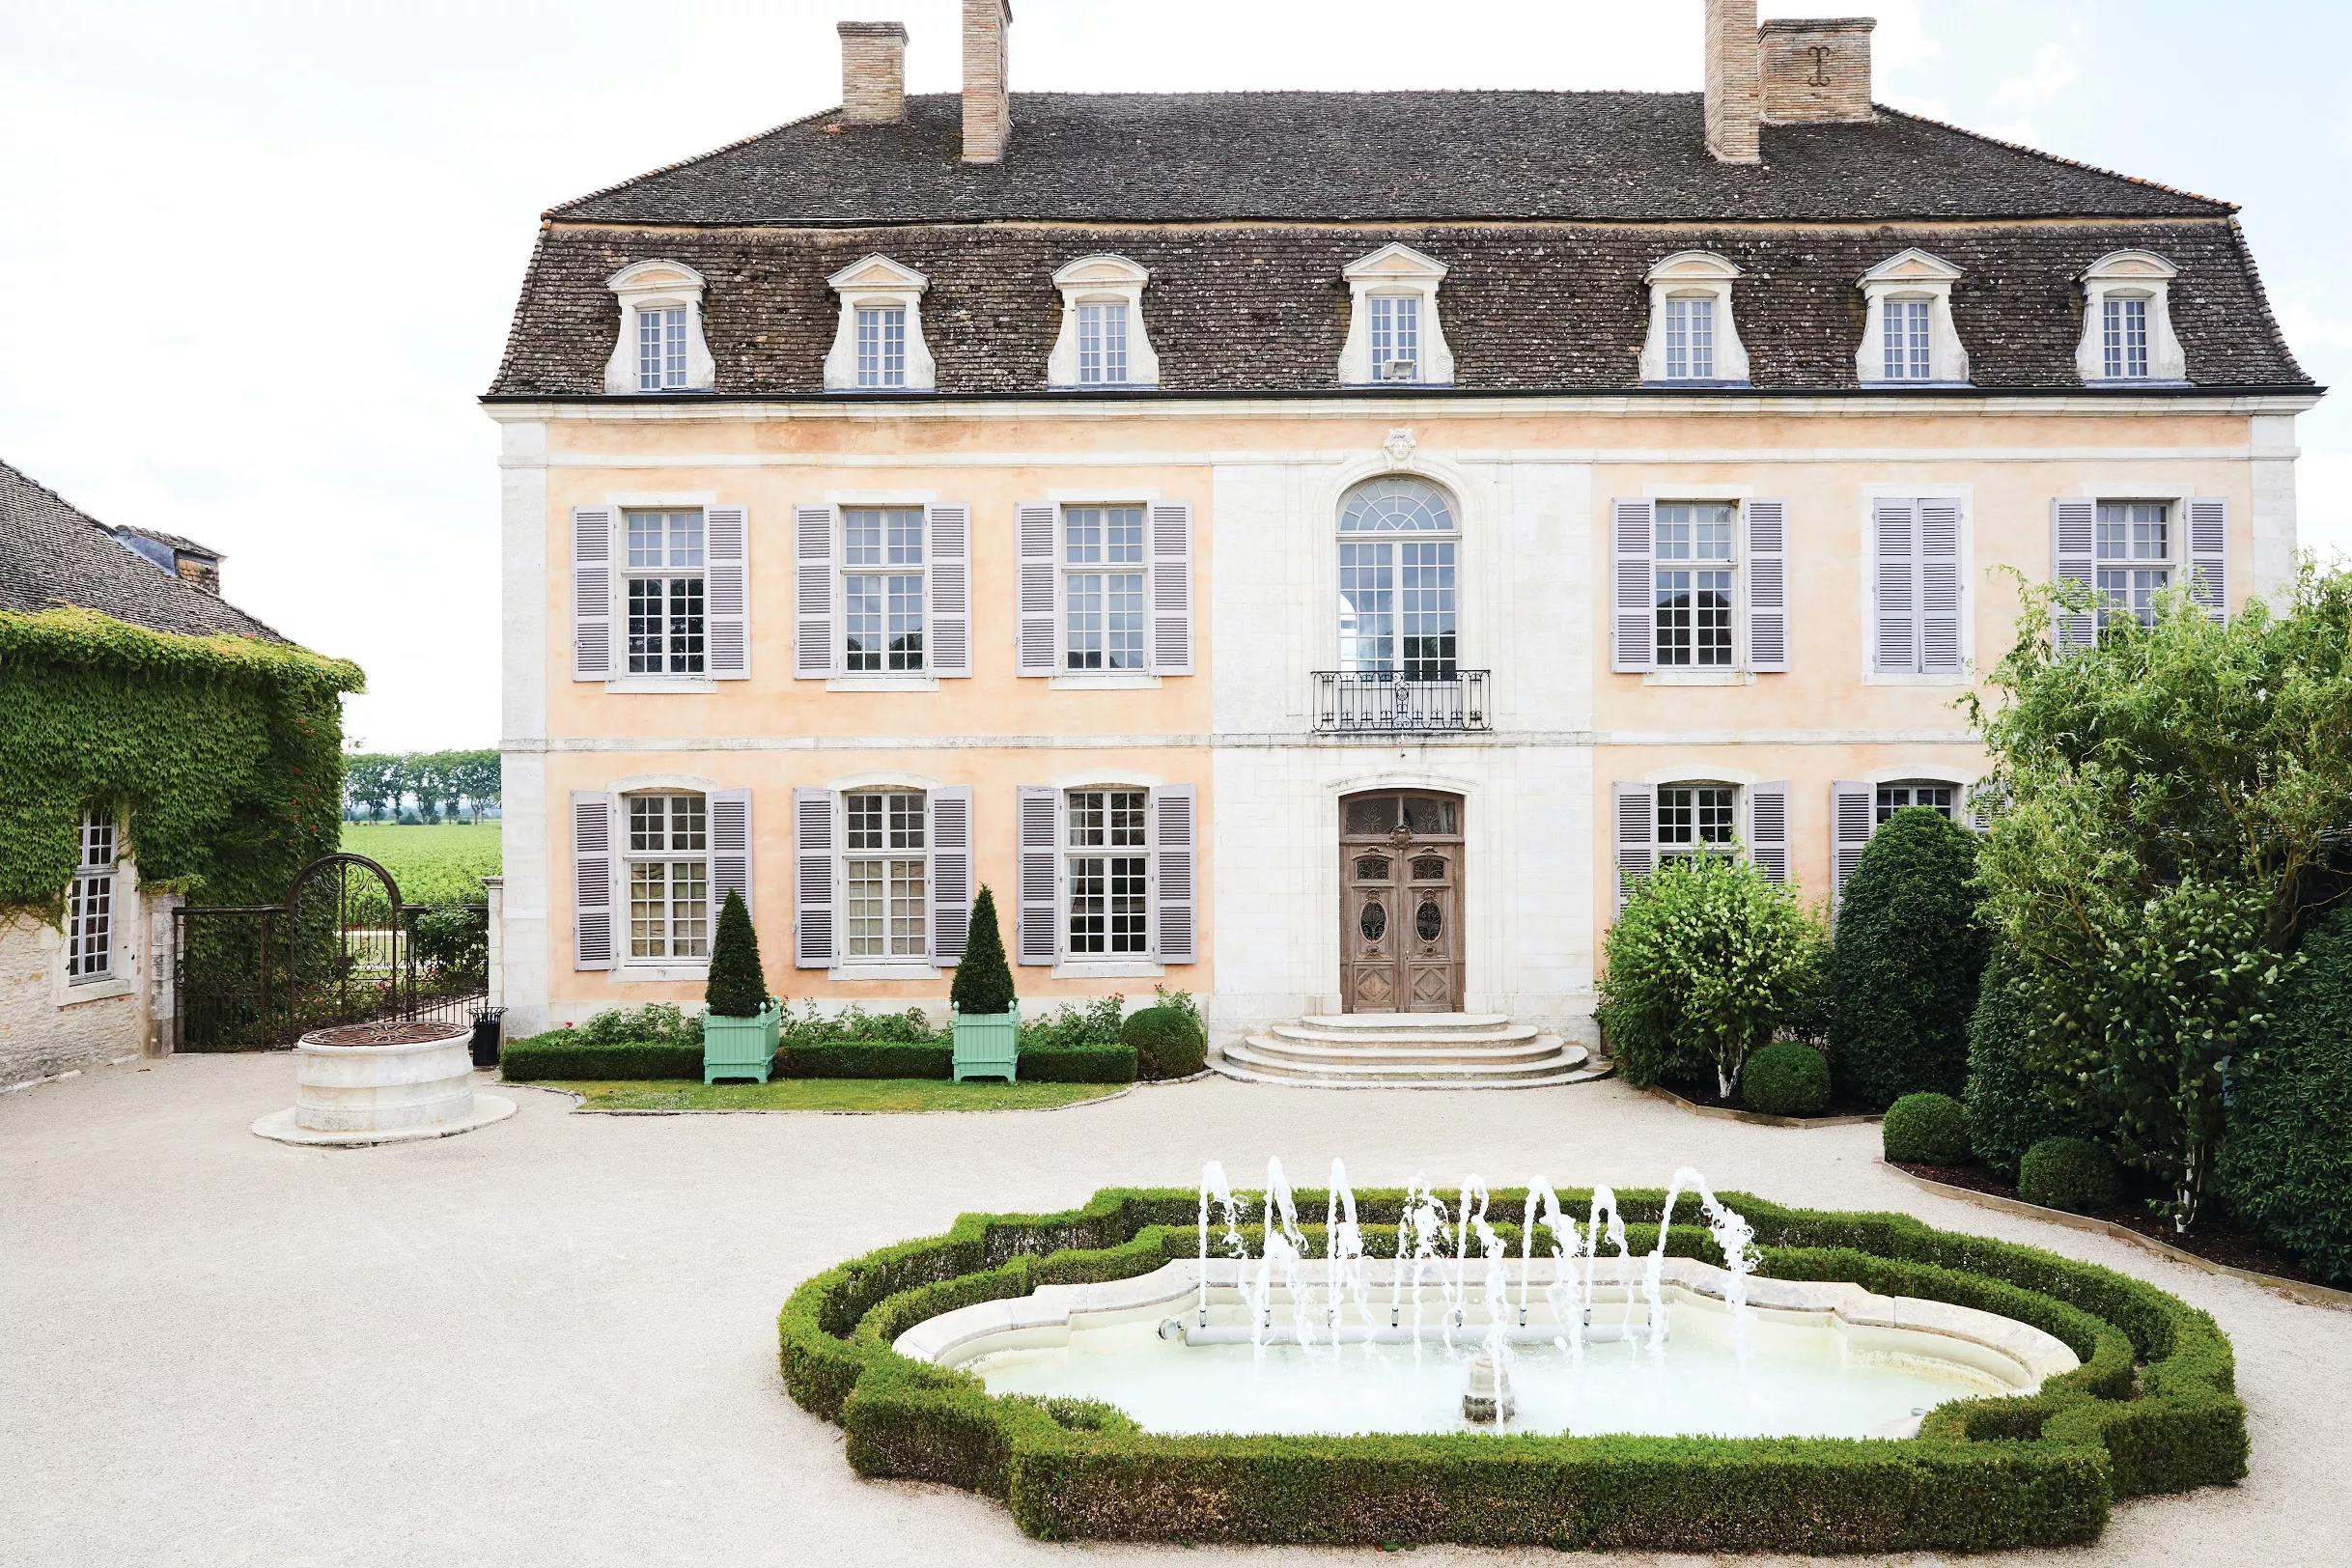 Chateau De Pommard in France, Europe | Wineries - Rated 0.8